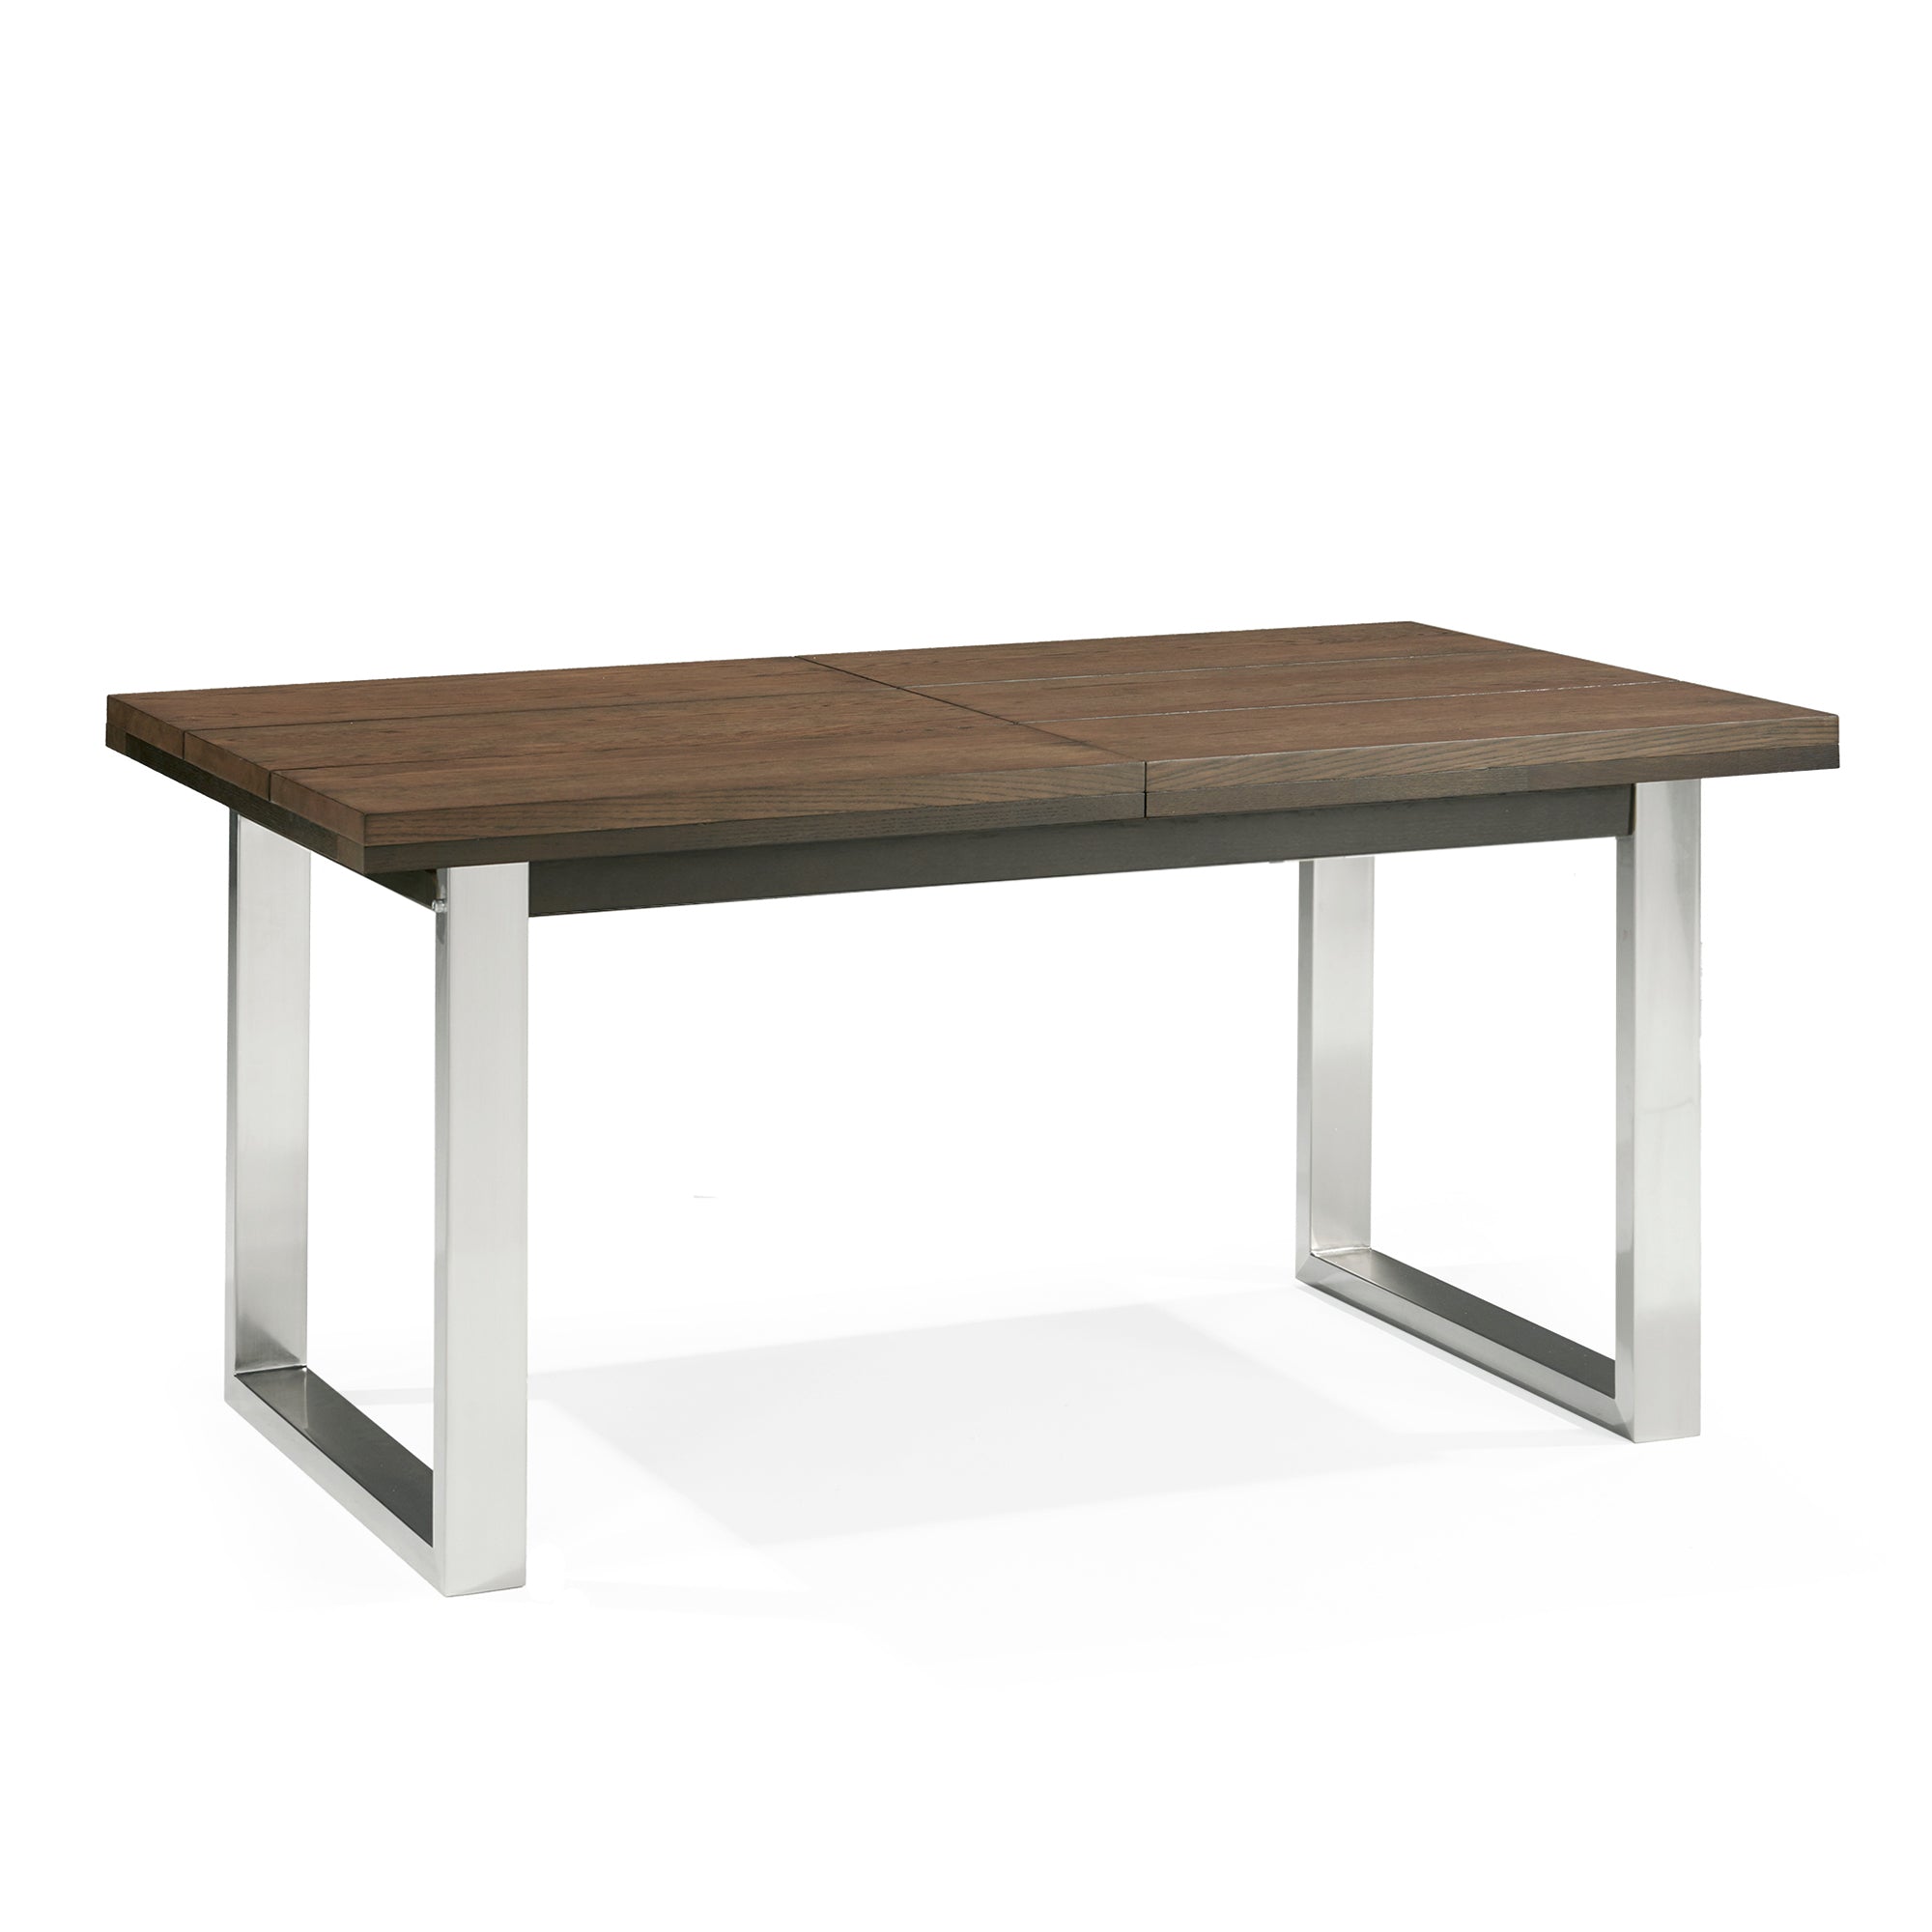 Toulouse 4 - 6 Extending Dining Table